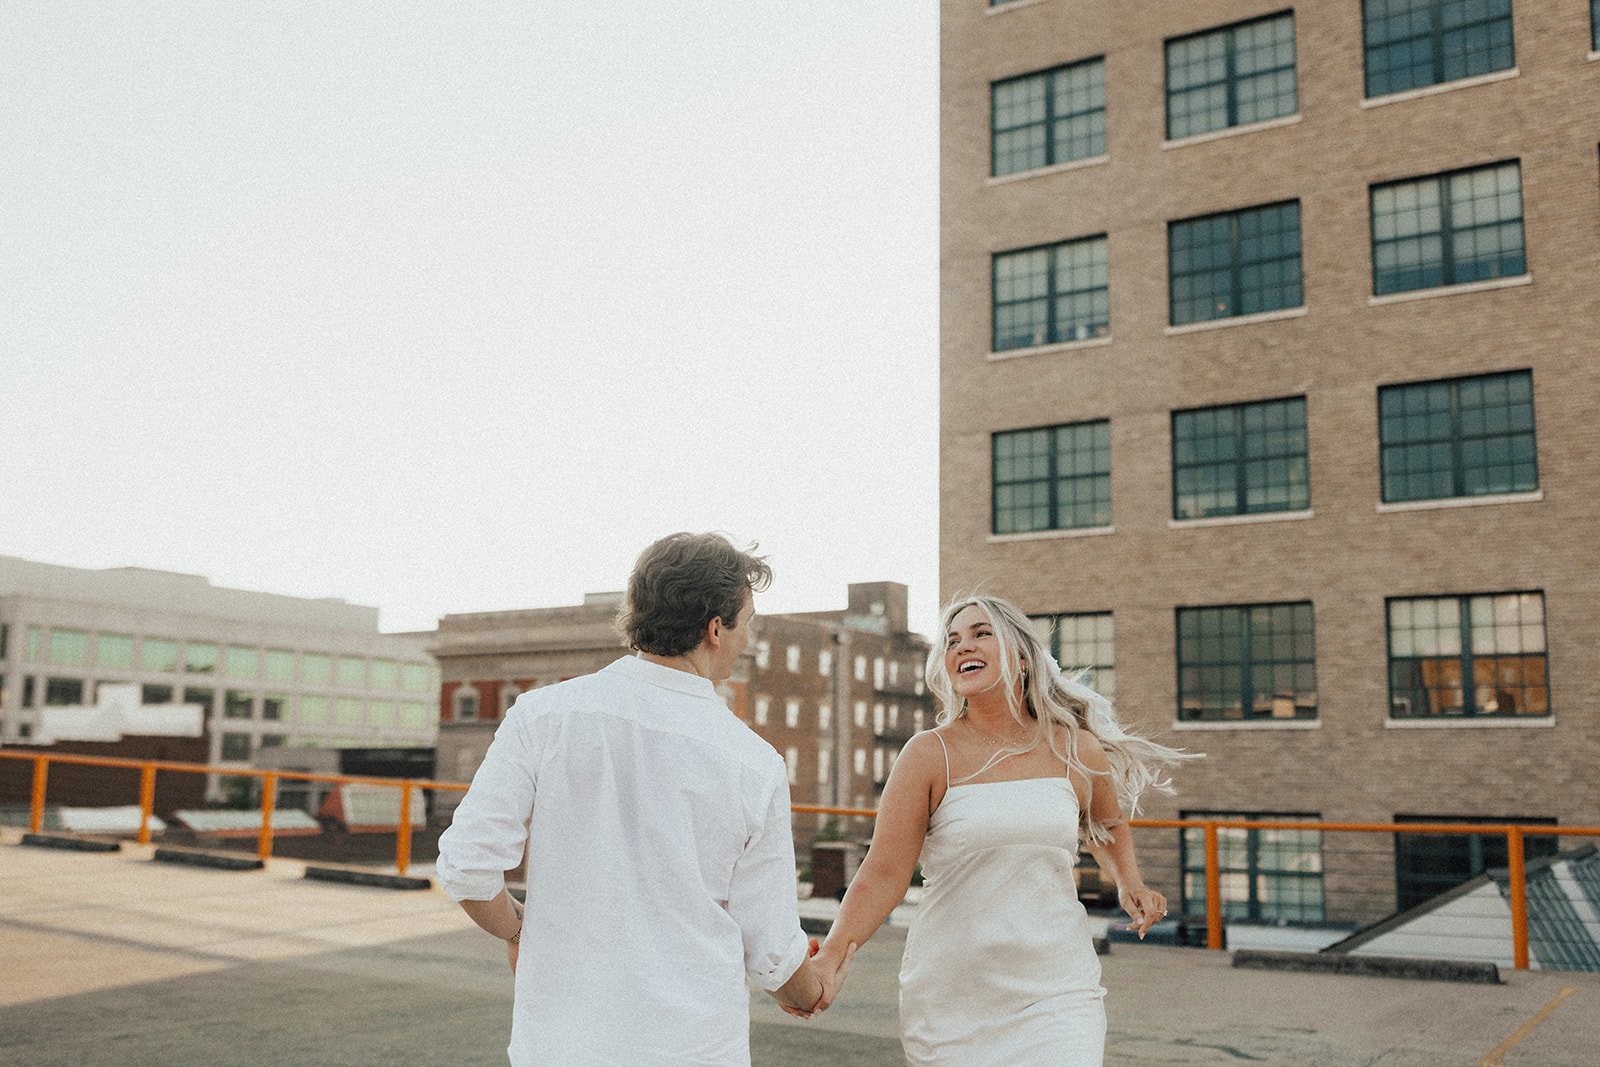 hannah-and-trey-parking-can-be-fun-downtown-memphis-river-walk-mississippi-beach-tennessee-wedding-photographer-jo-darling-photography-136.jpg